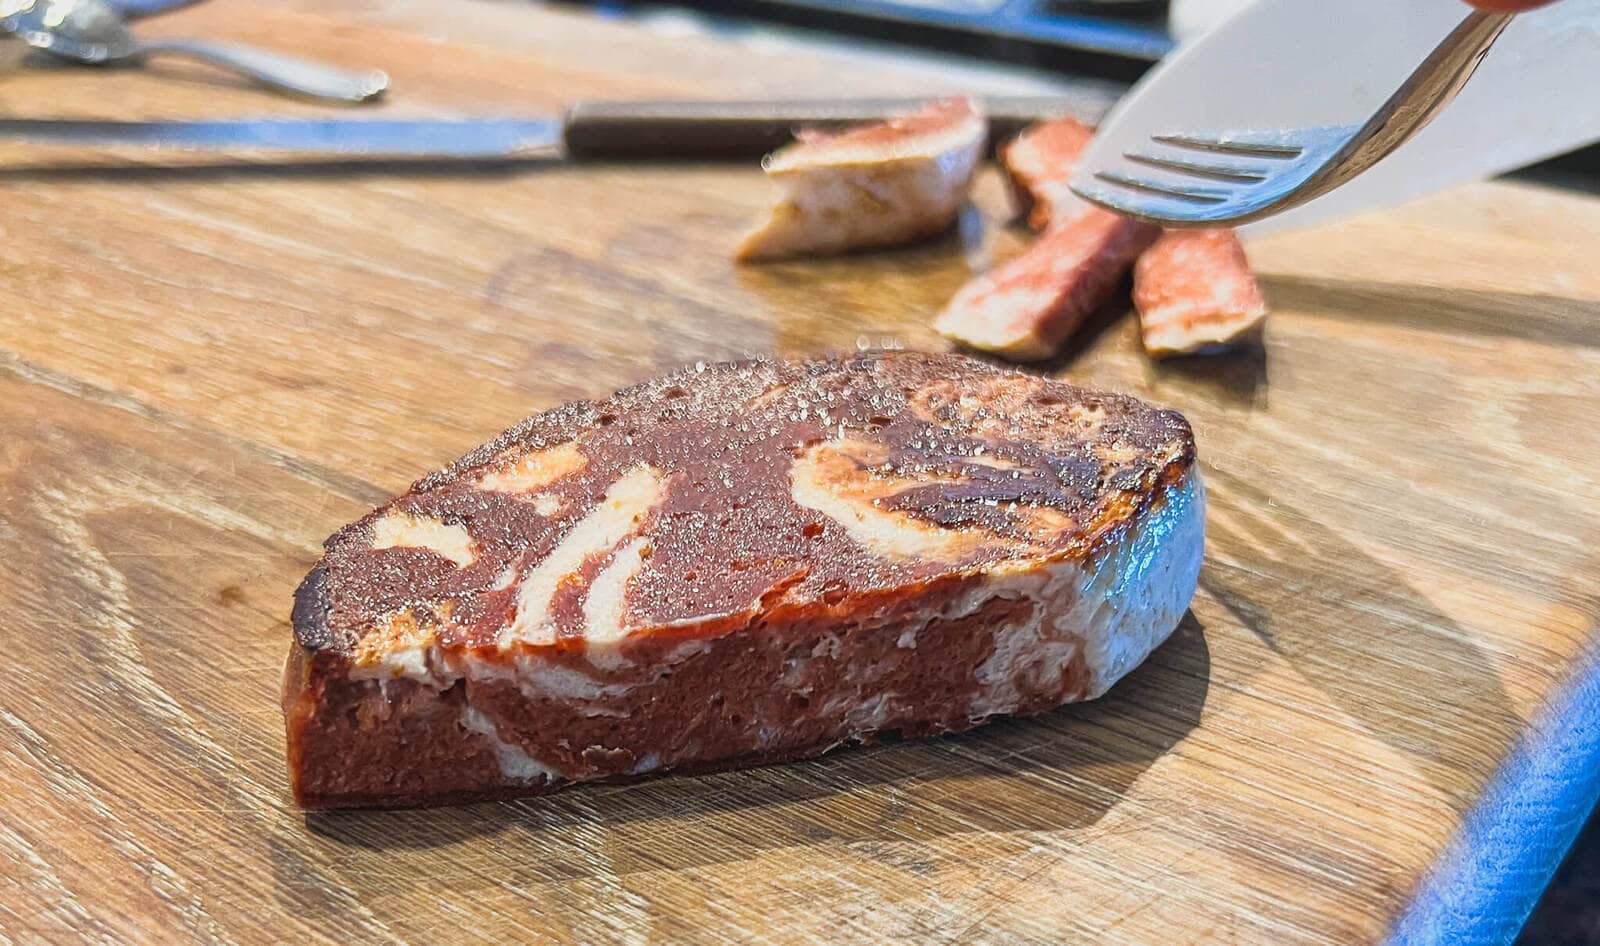 This Former Meat Company Is Now Making Vegan Ribeye Steak Because It's More Sustainable